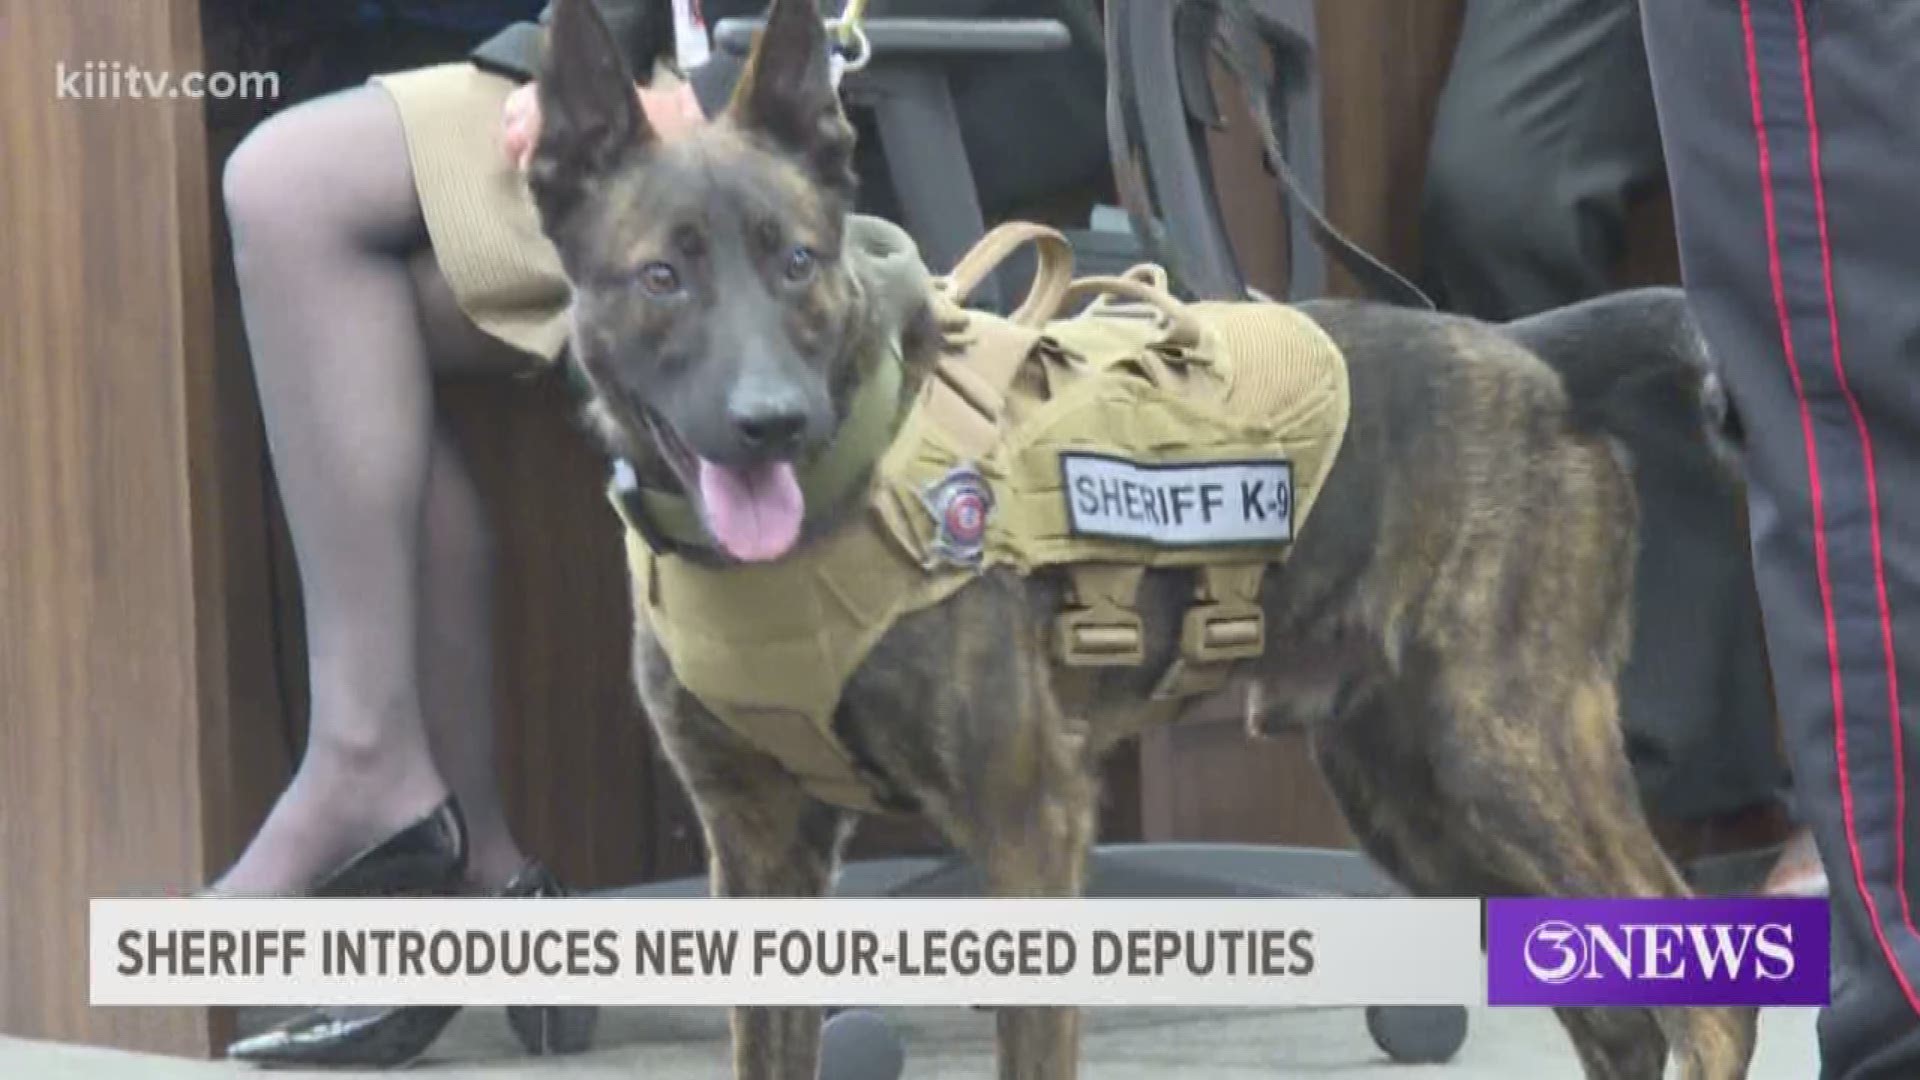 The Nueces County Sherrif's Office gained two new furry additions to their team.